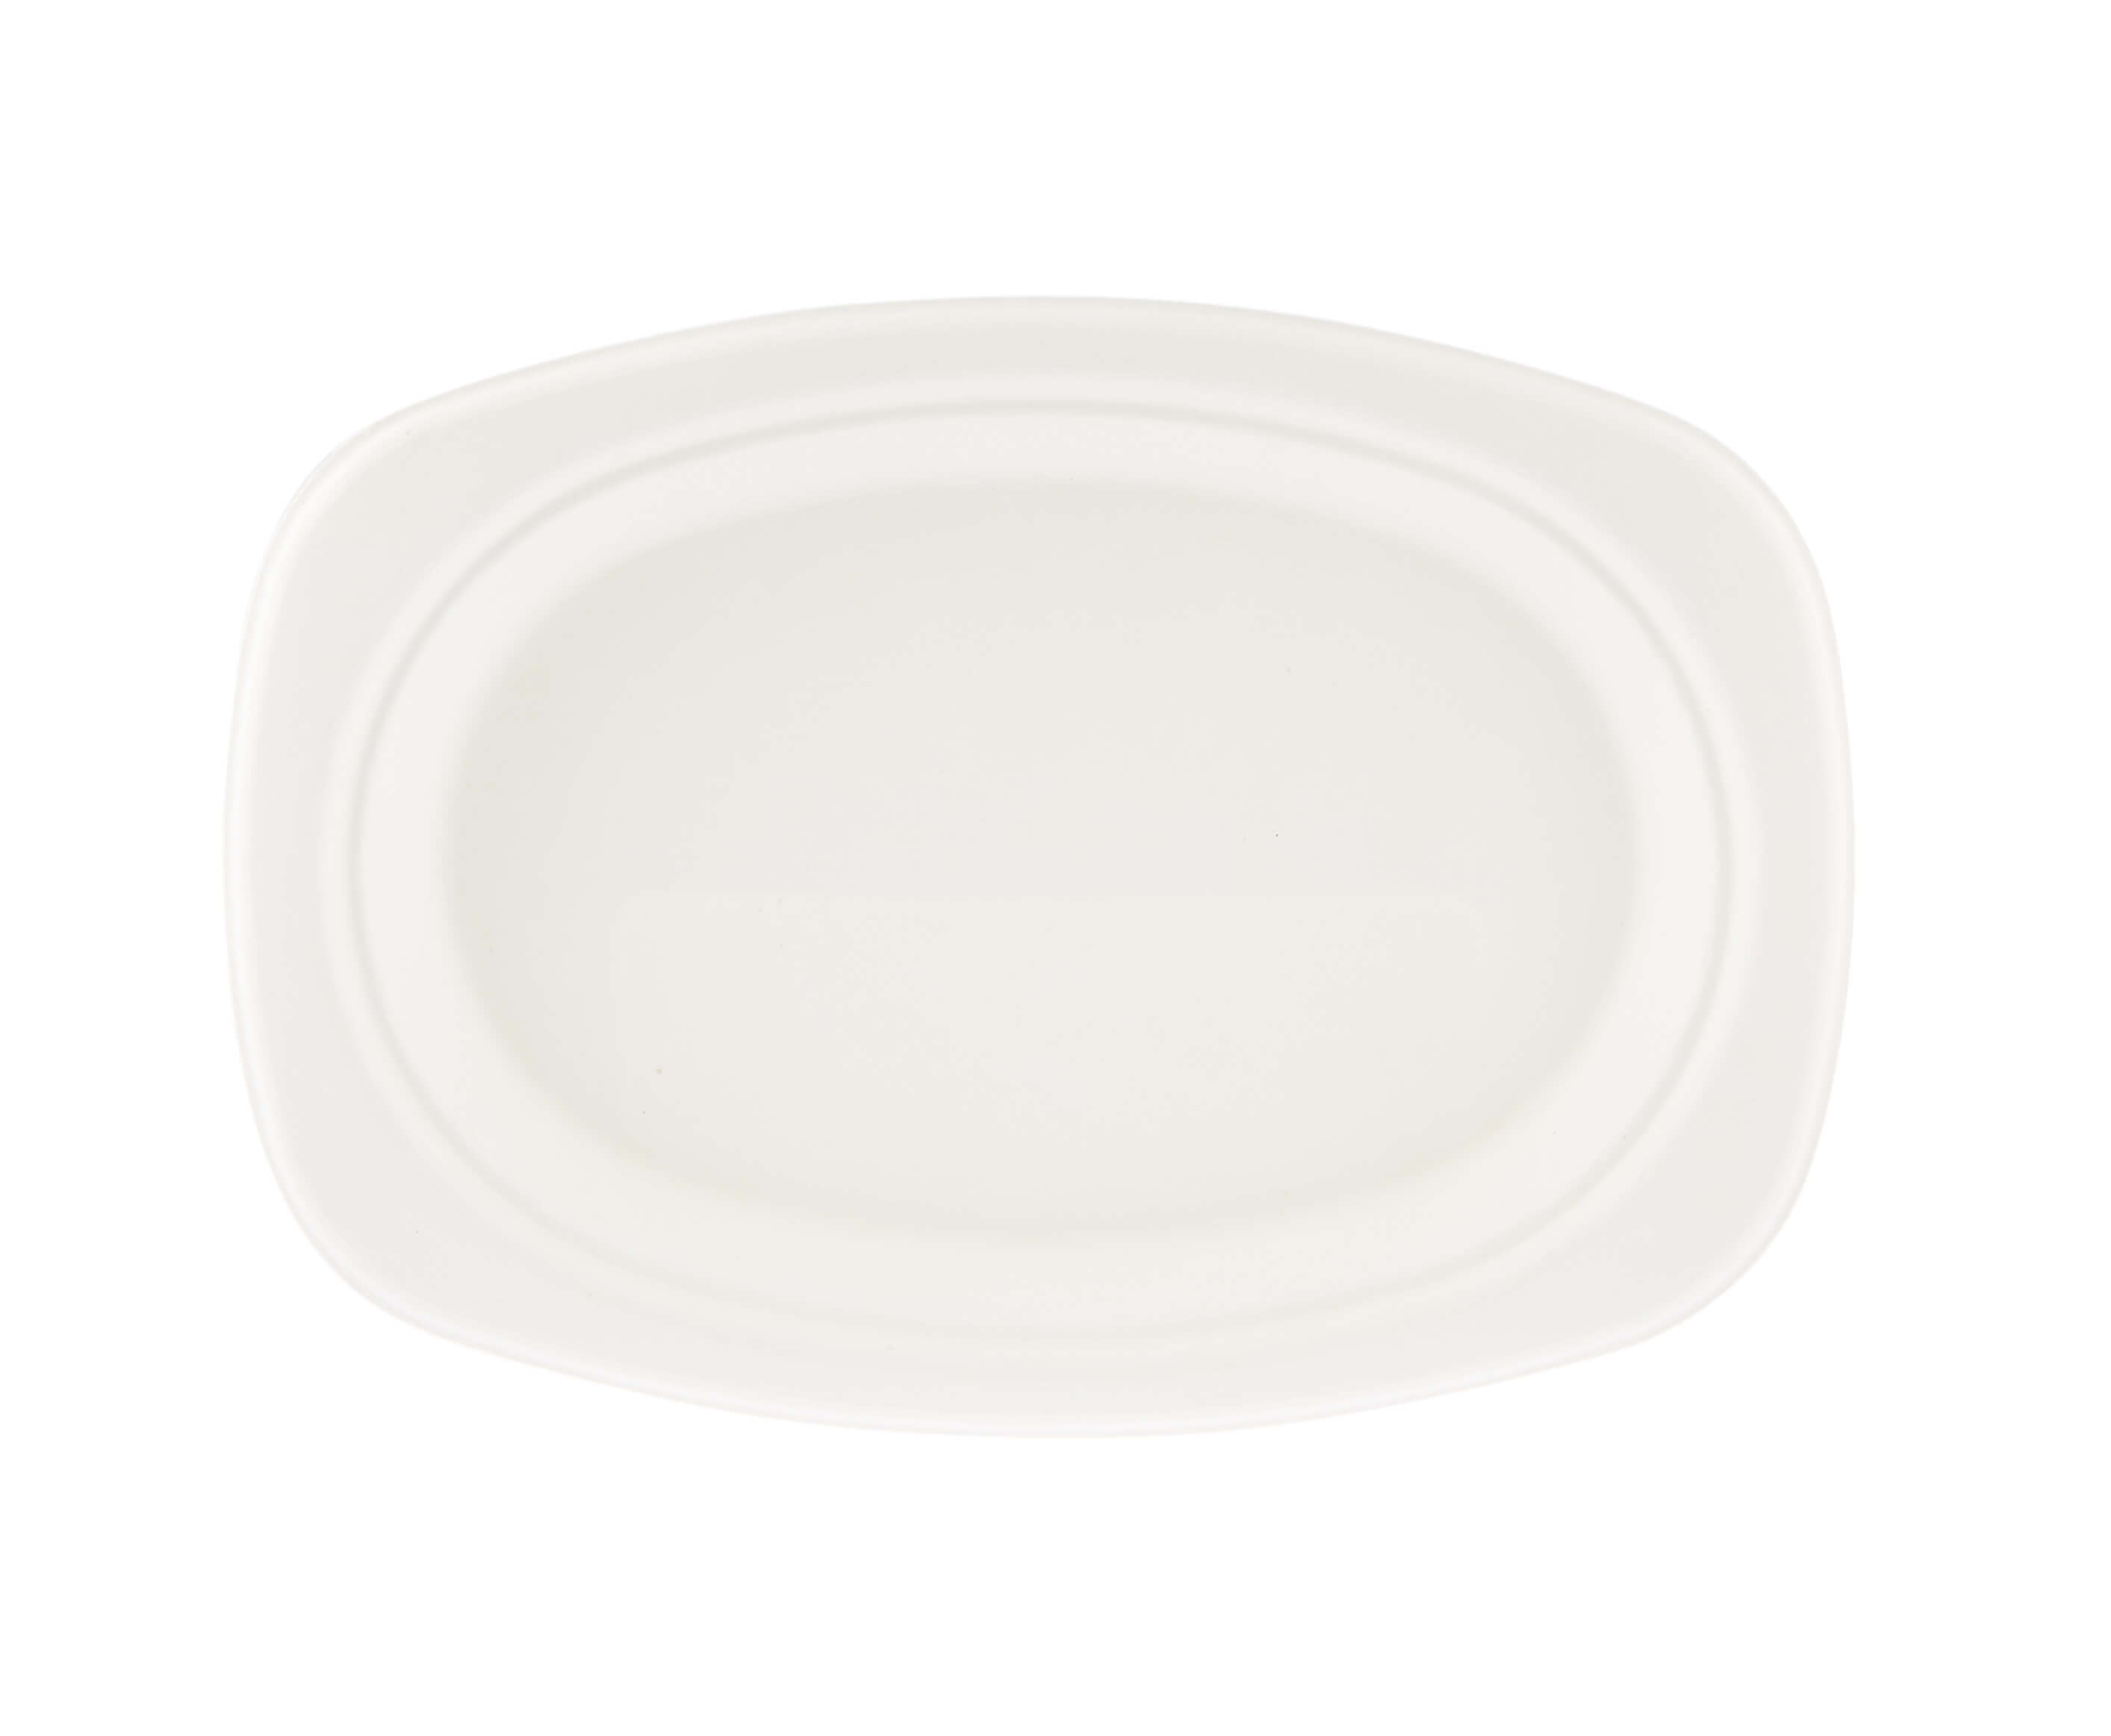 9X6.5 Inch Bio-Degradable Oval Plate 